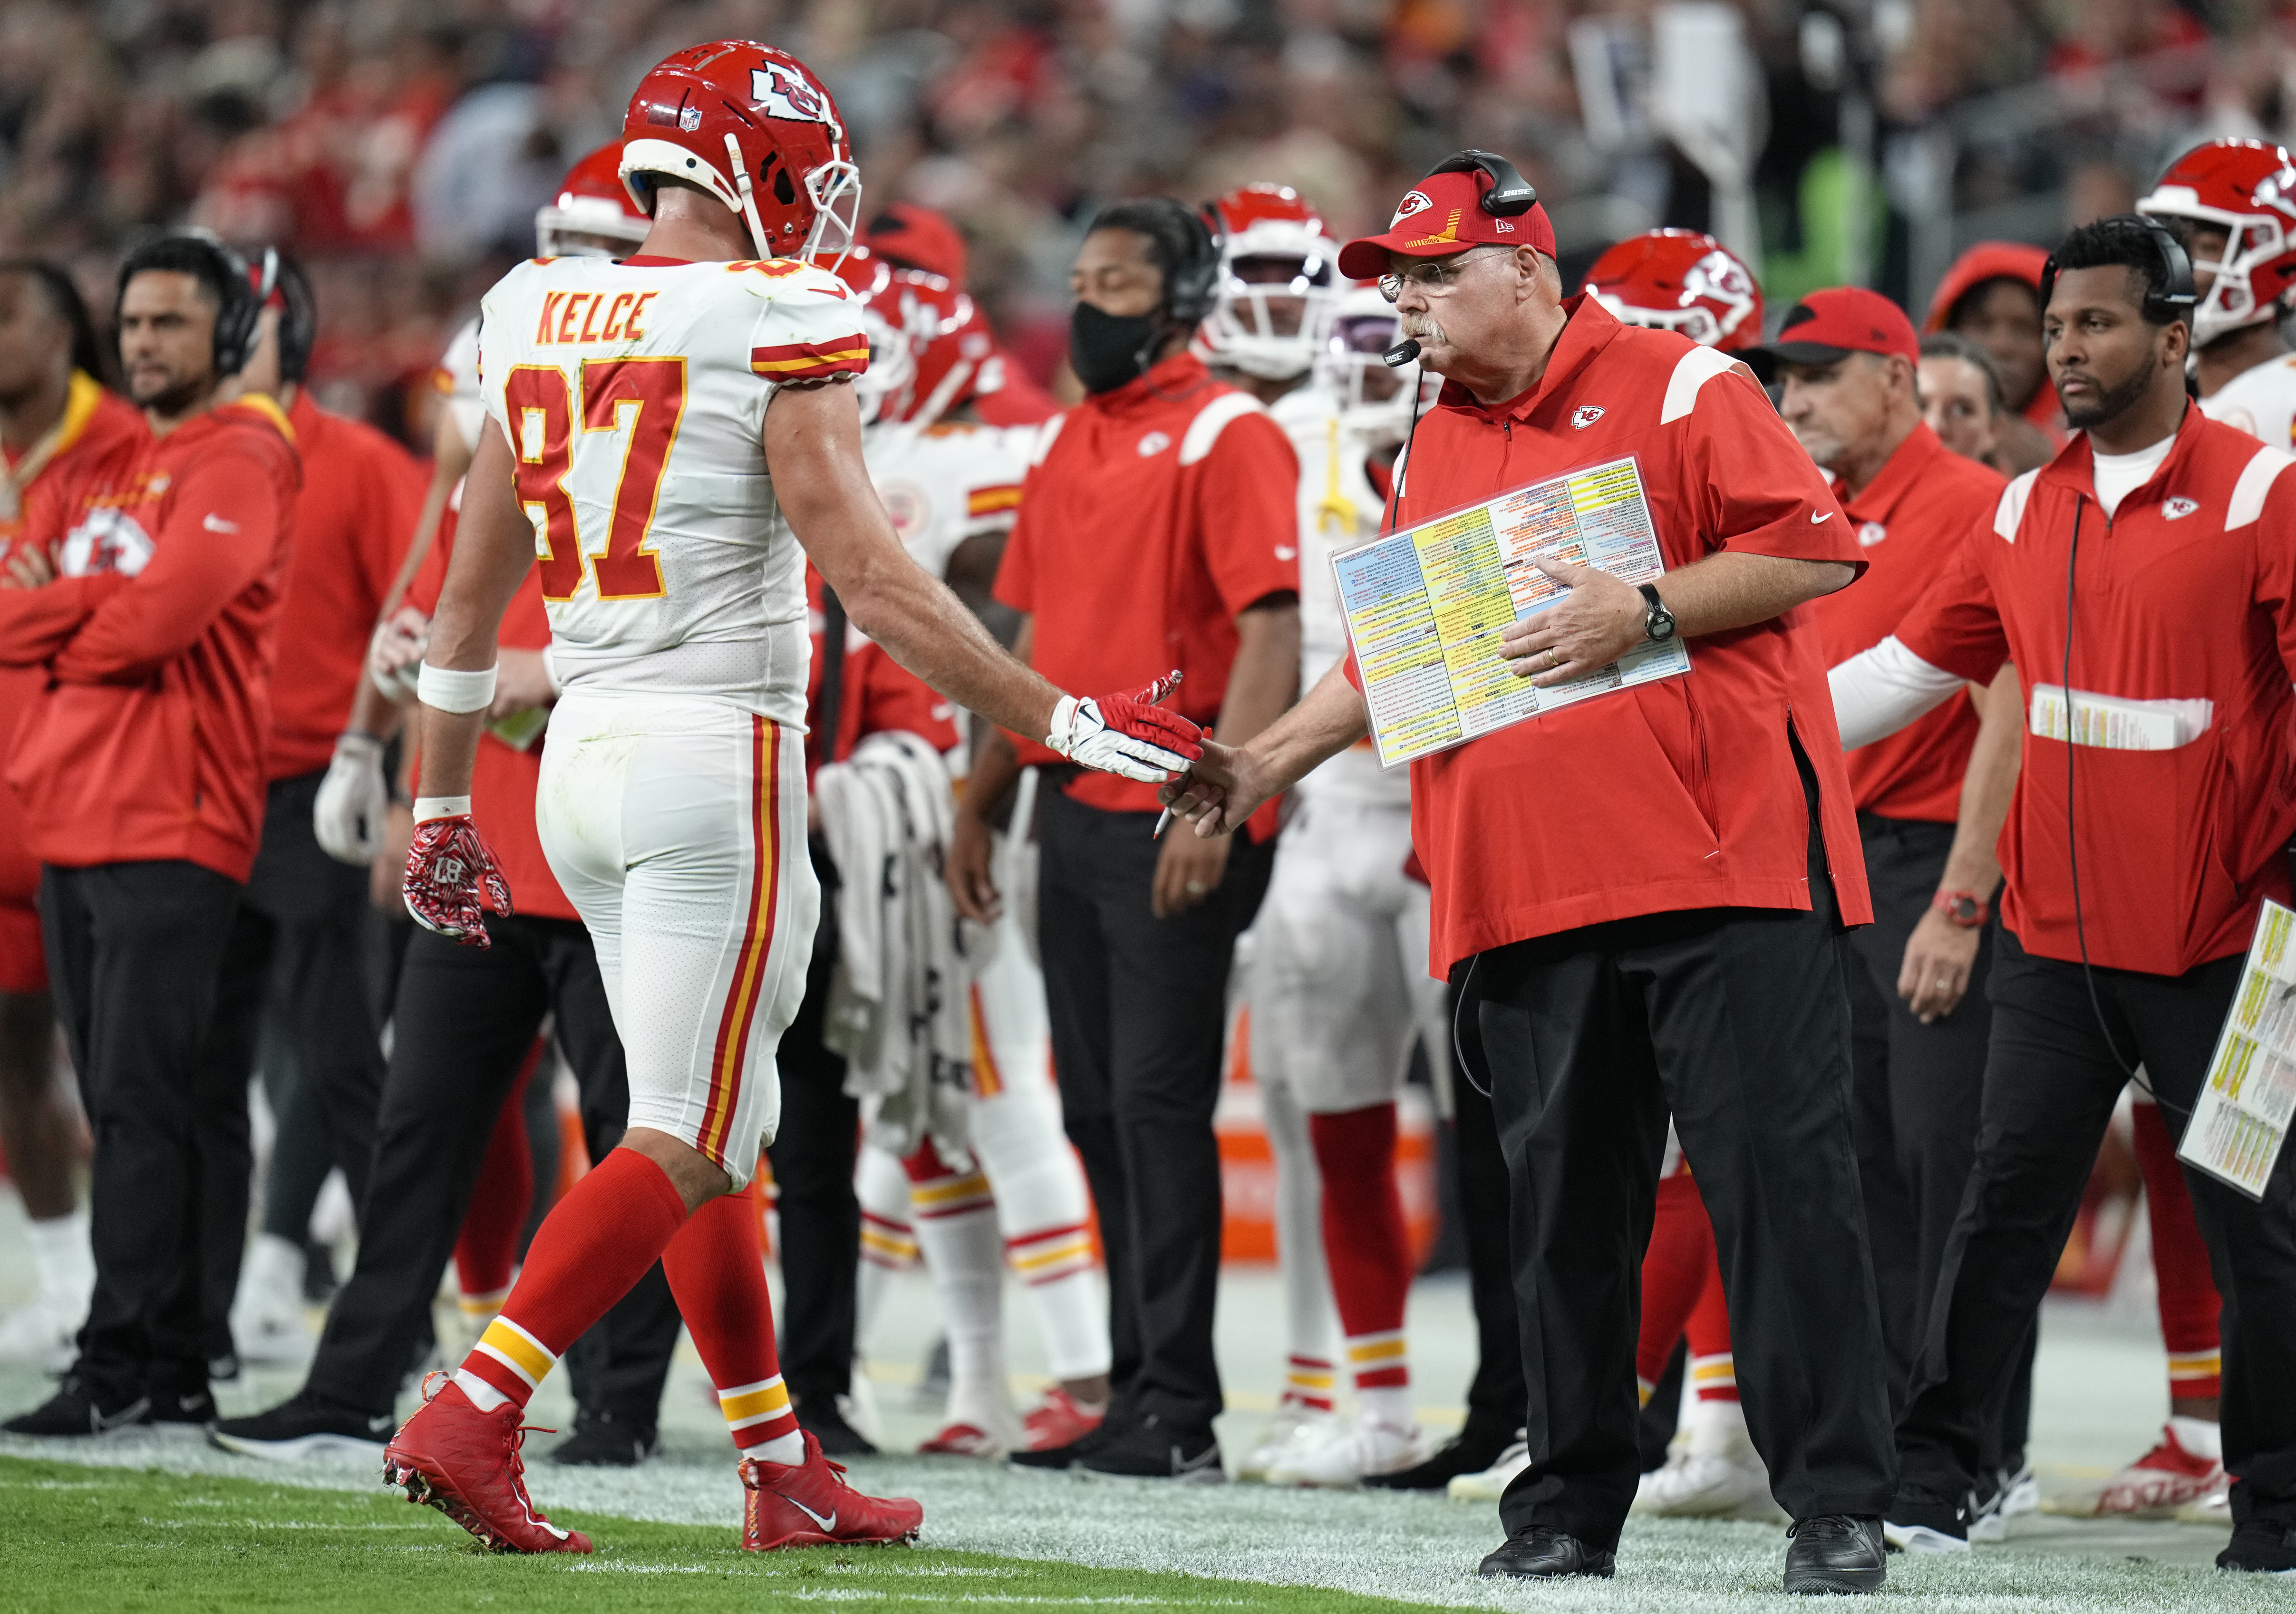 The Chiefs' winning formula is to surround their immense star